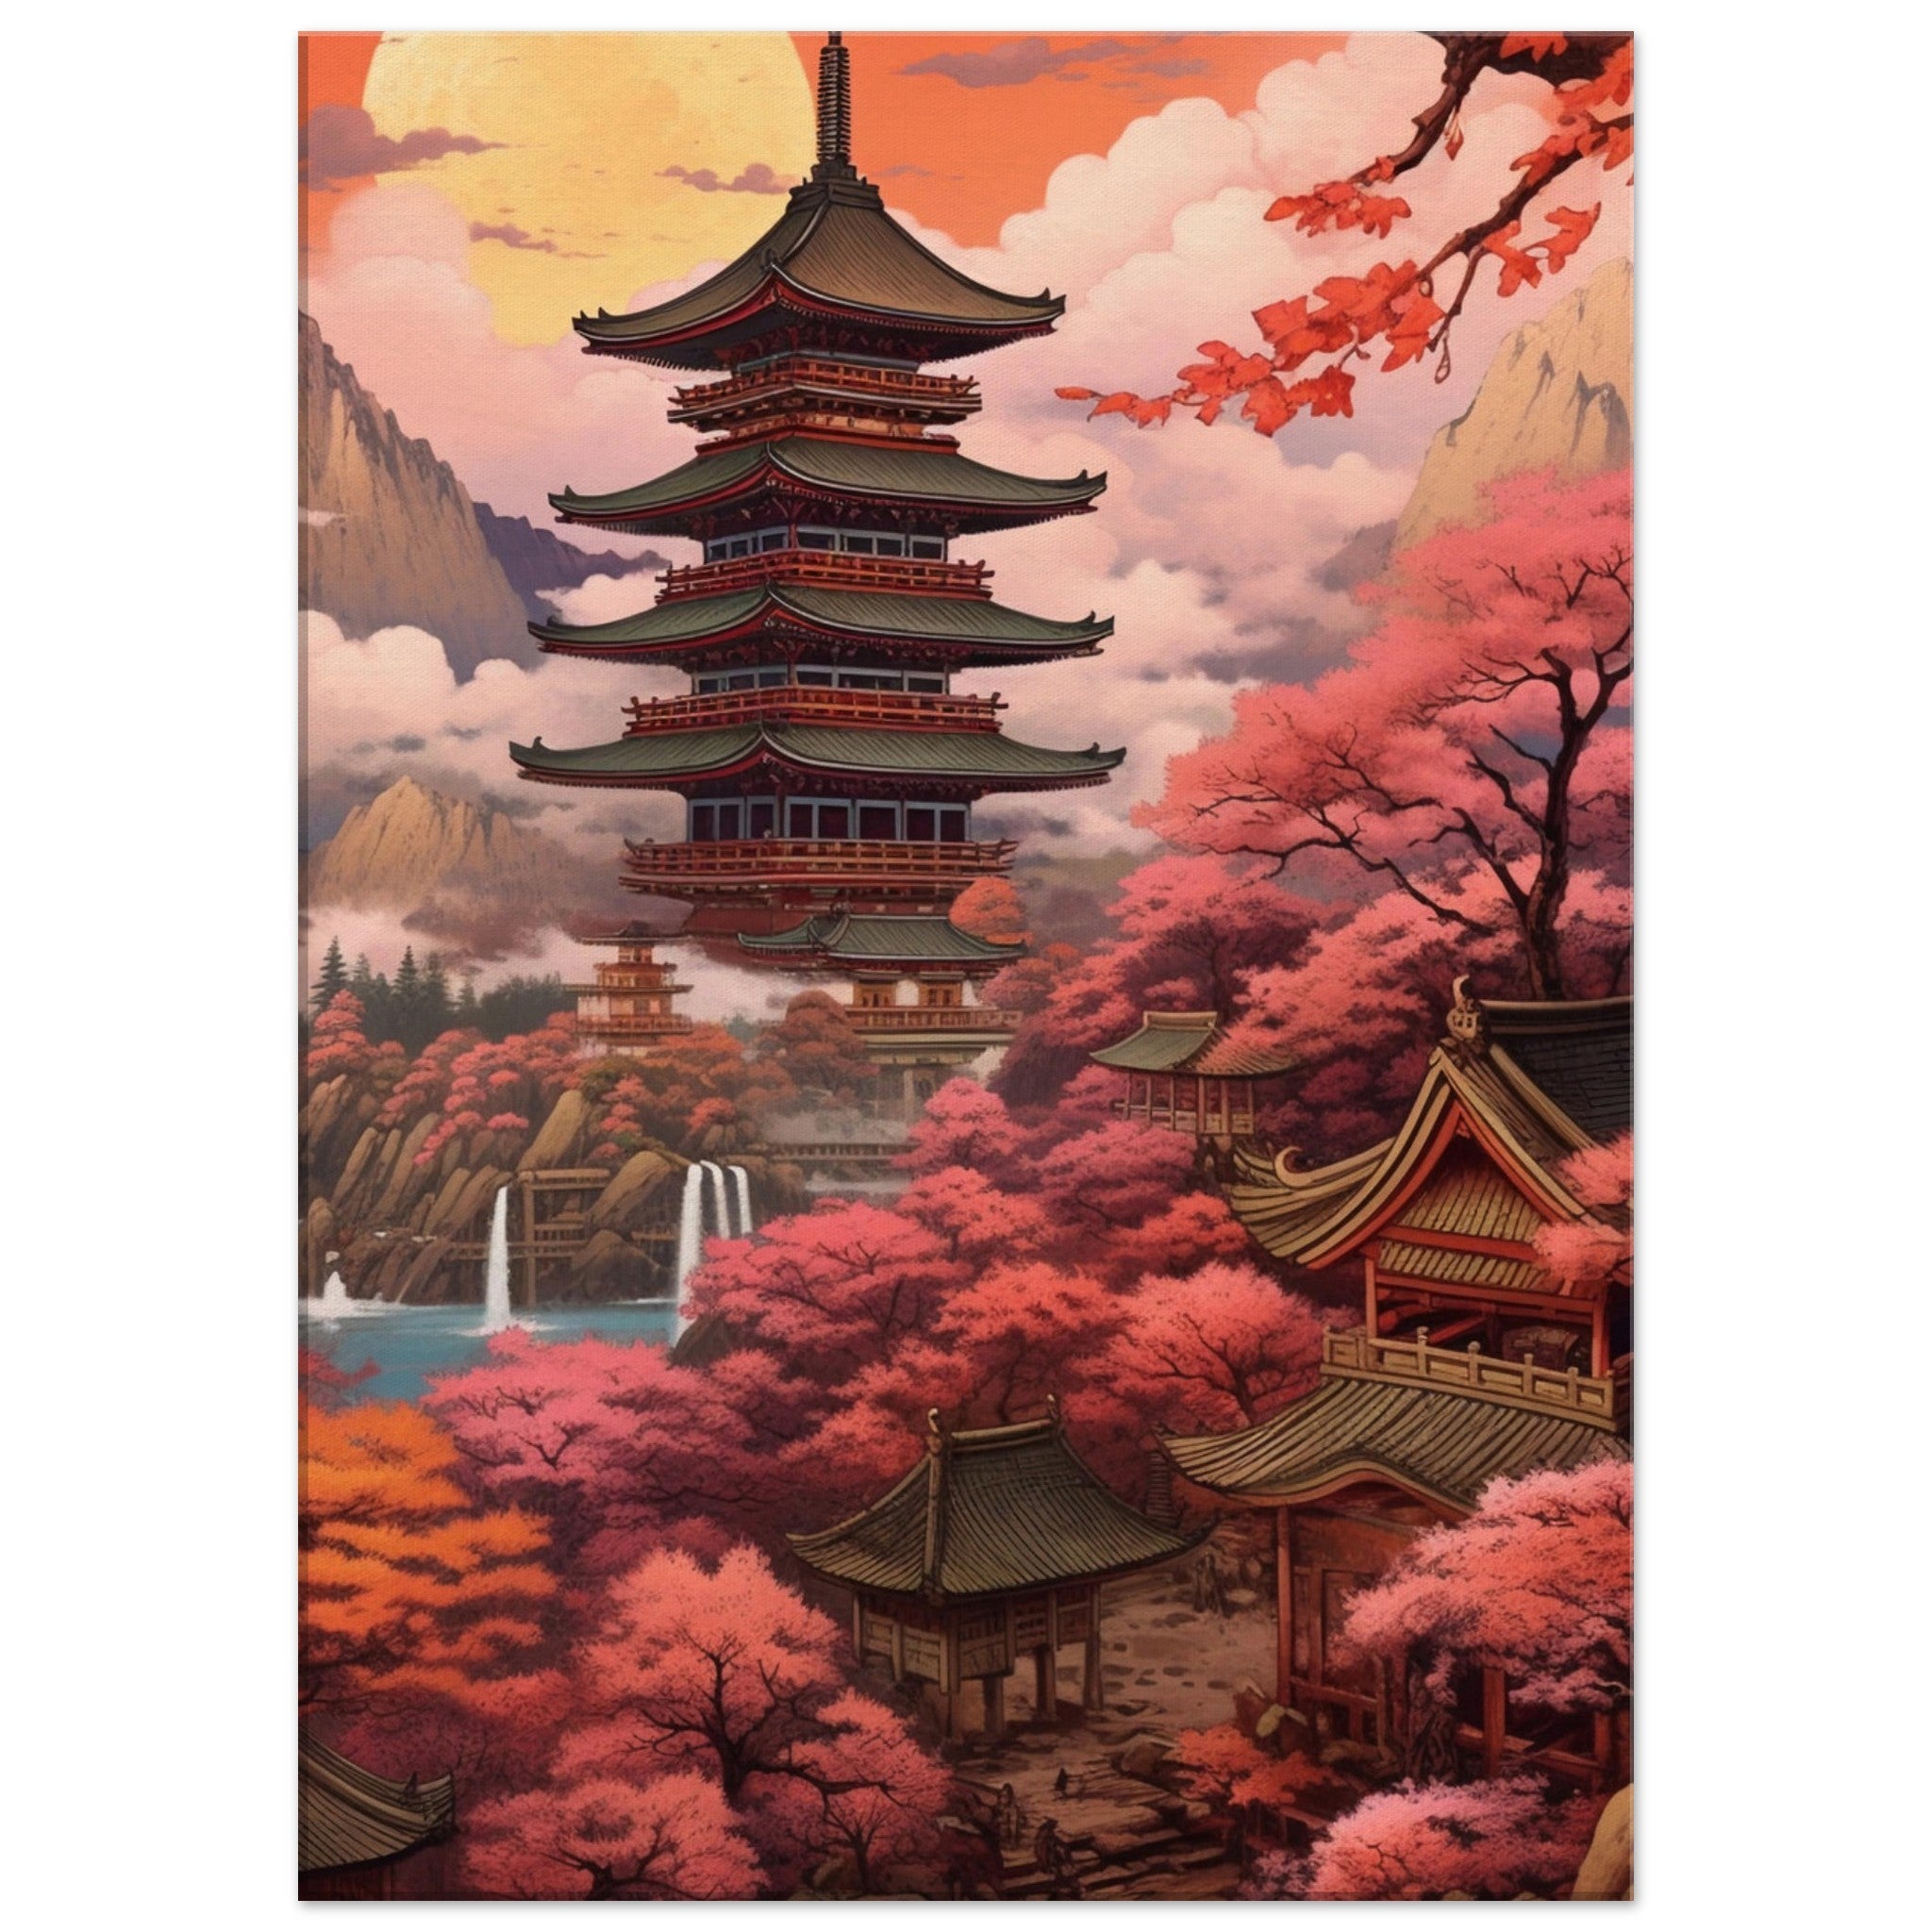 Japanese old temple with mountains - immersiarts